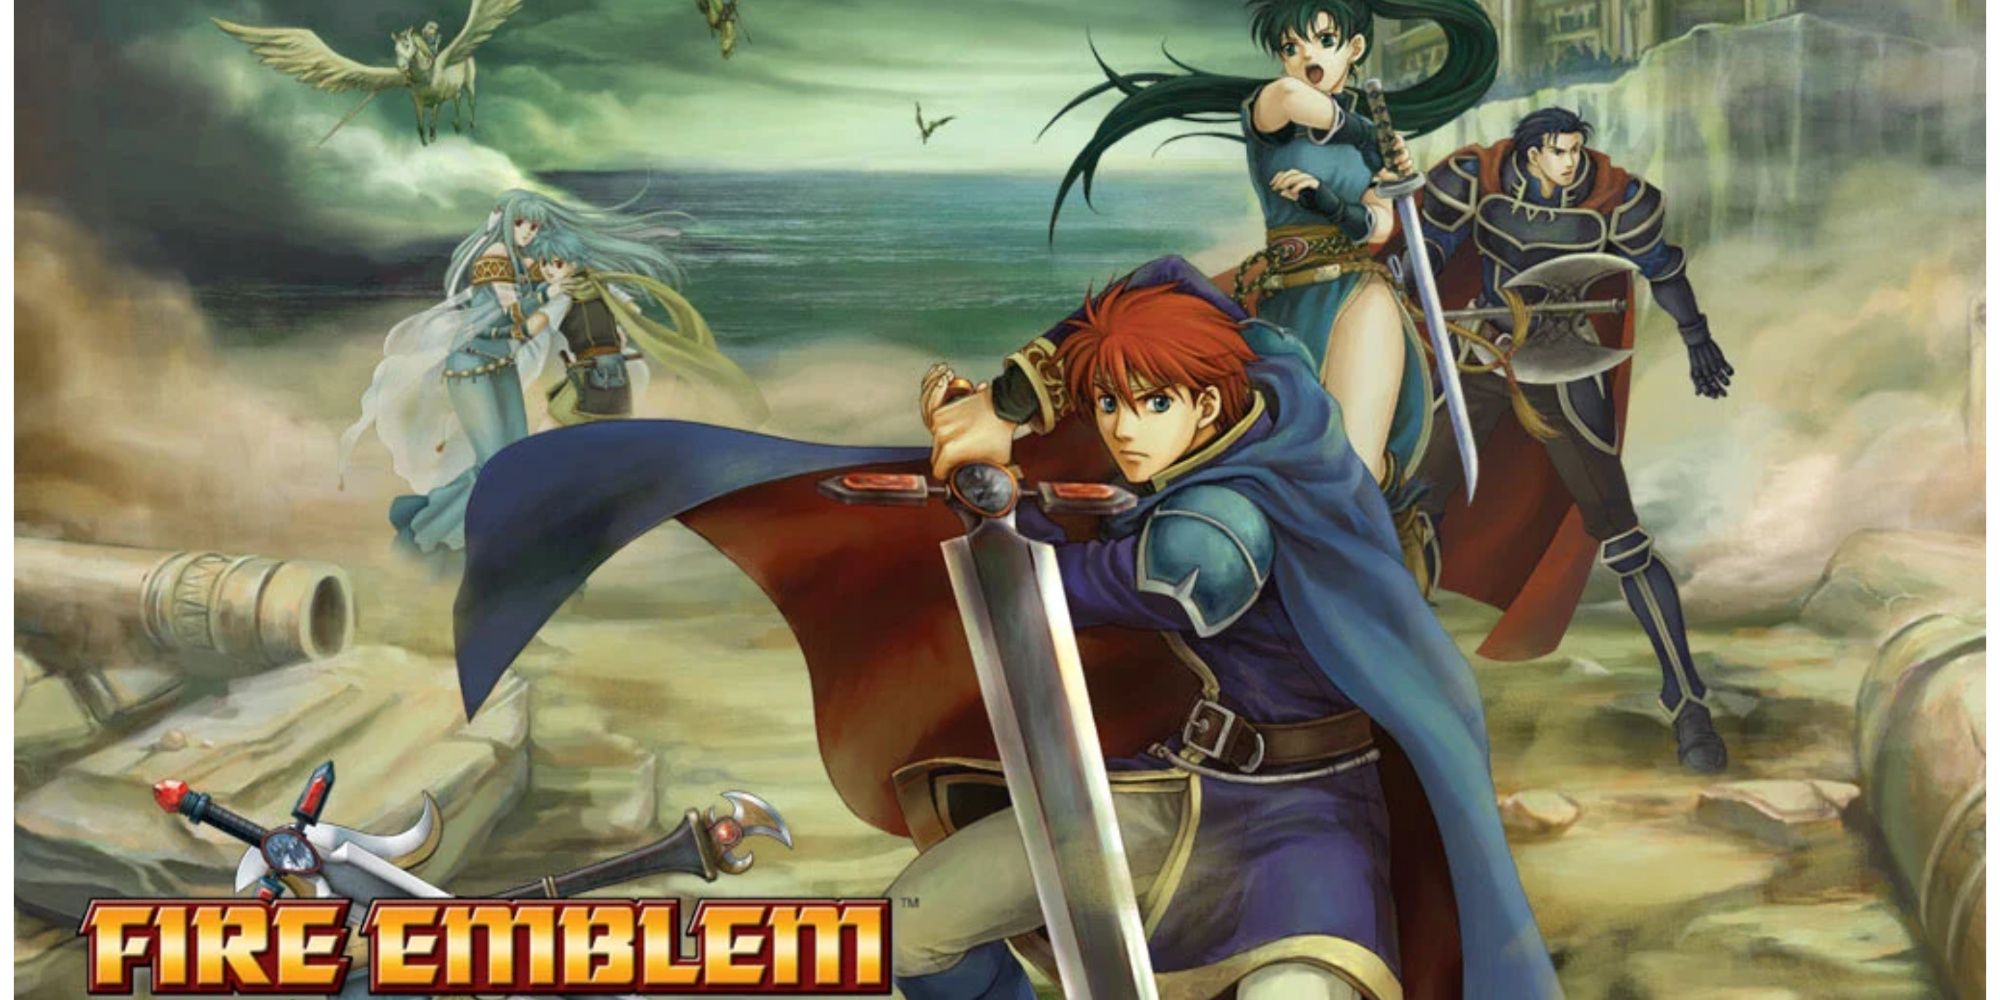 Promo art featuring characters in Fire Emblem The Blazing Blade